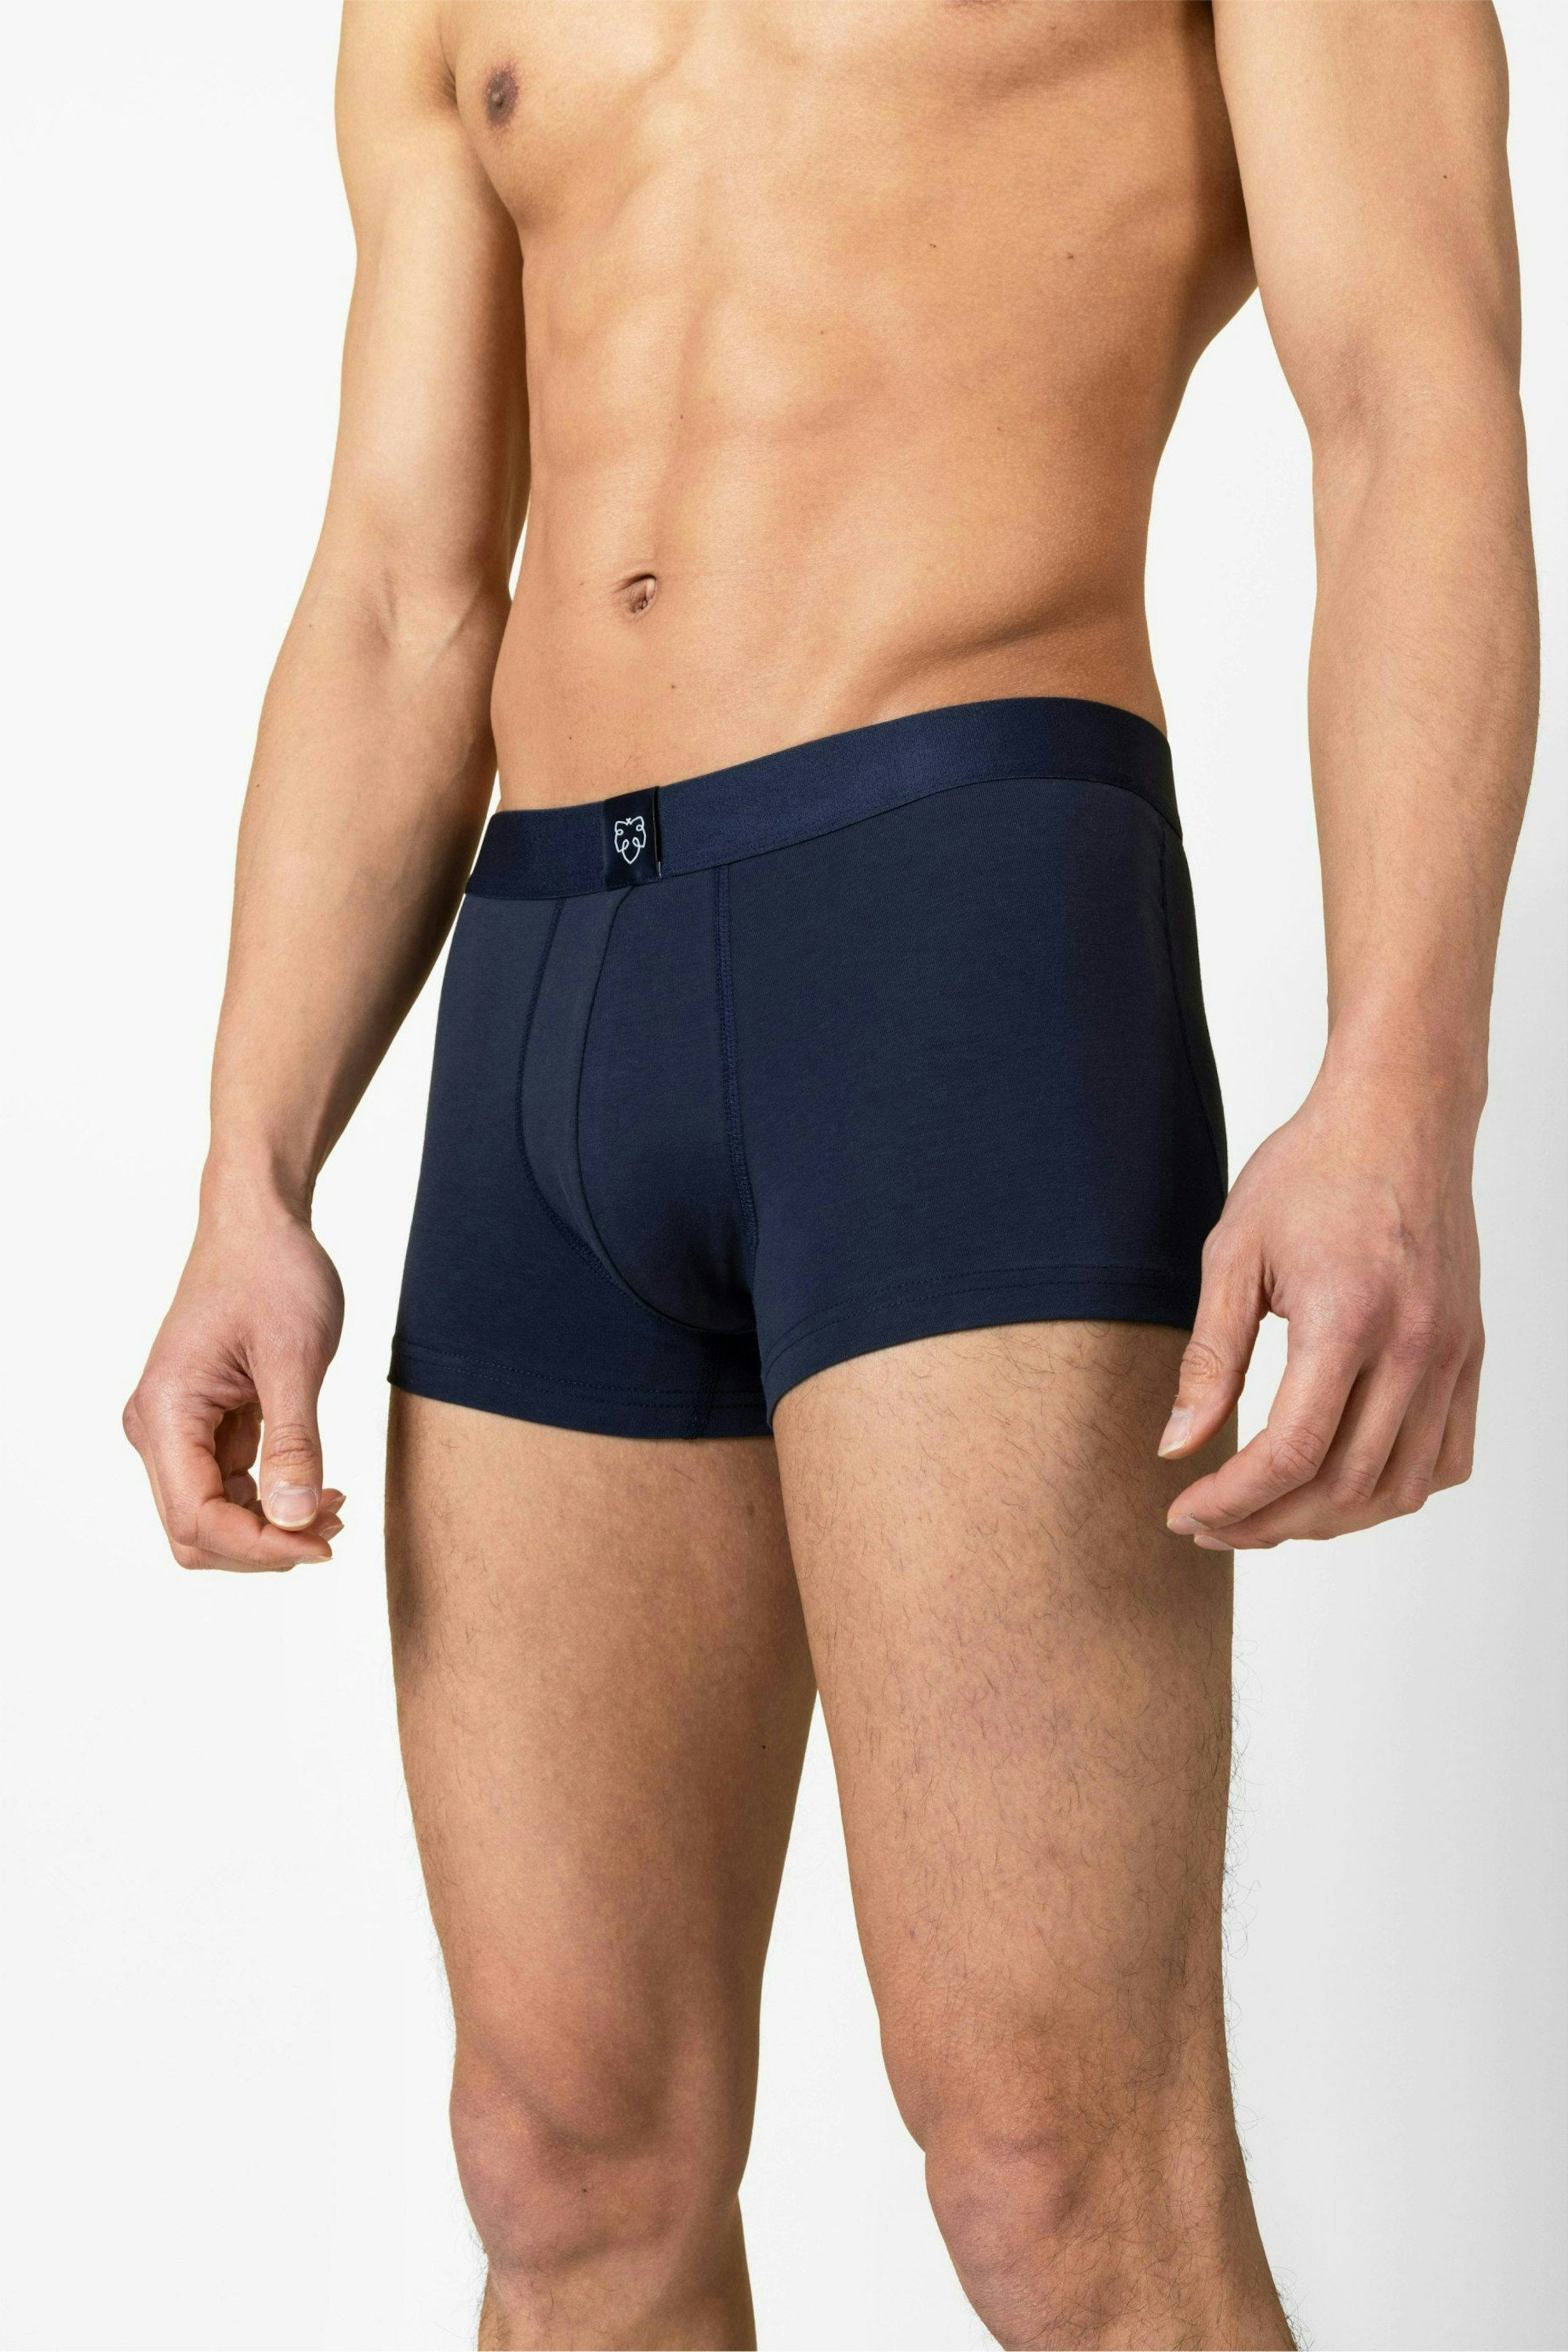 Solid Navy Trunk